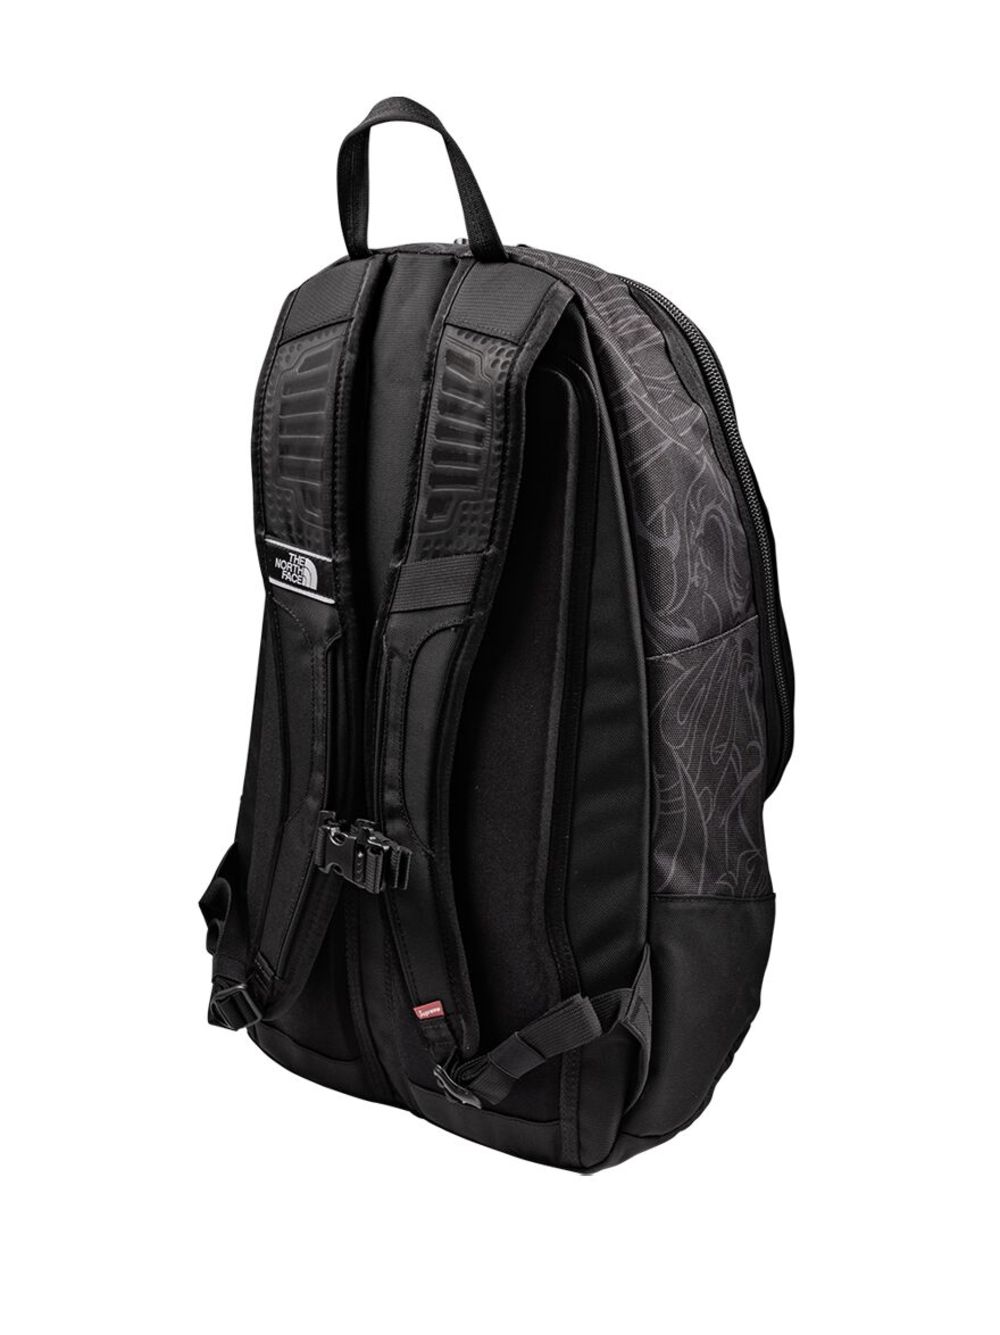 Supreme x The North Face Steep Tech Backpack - Farfetch